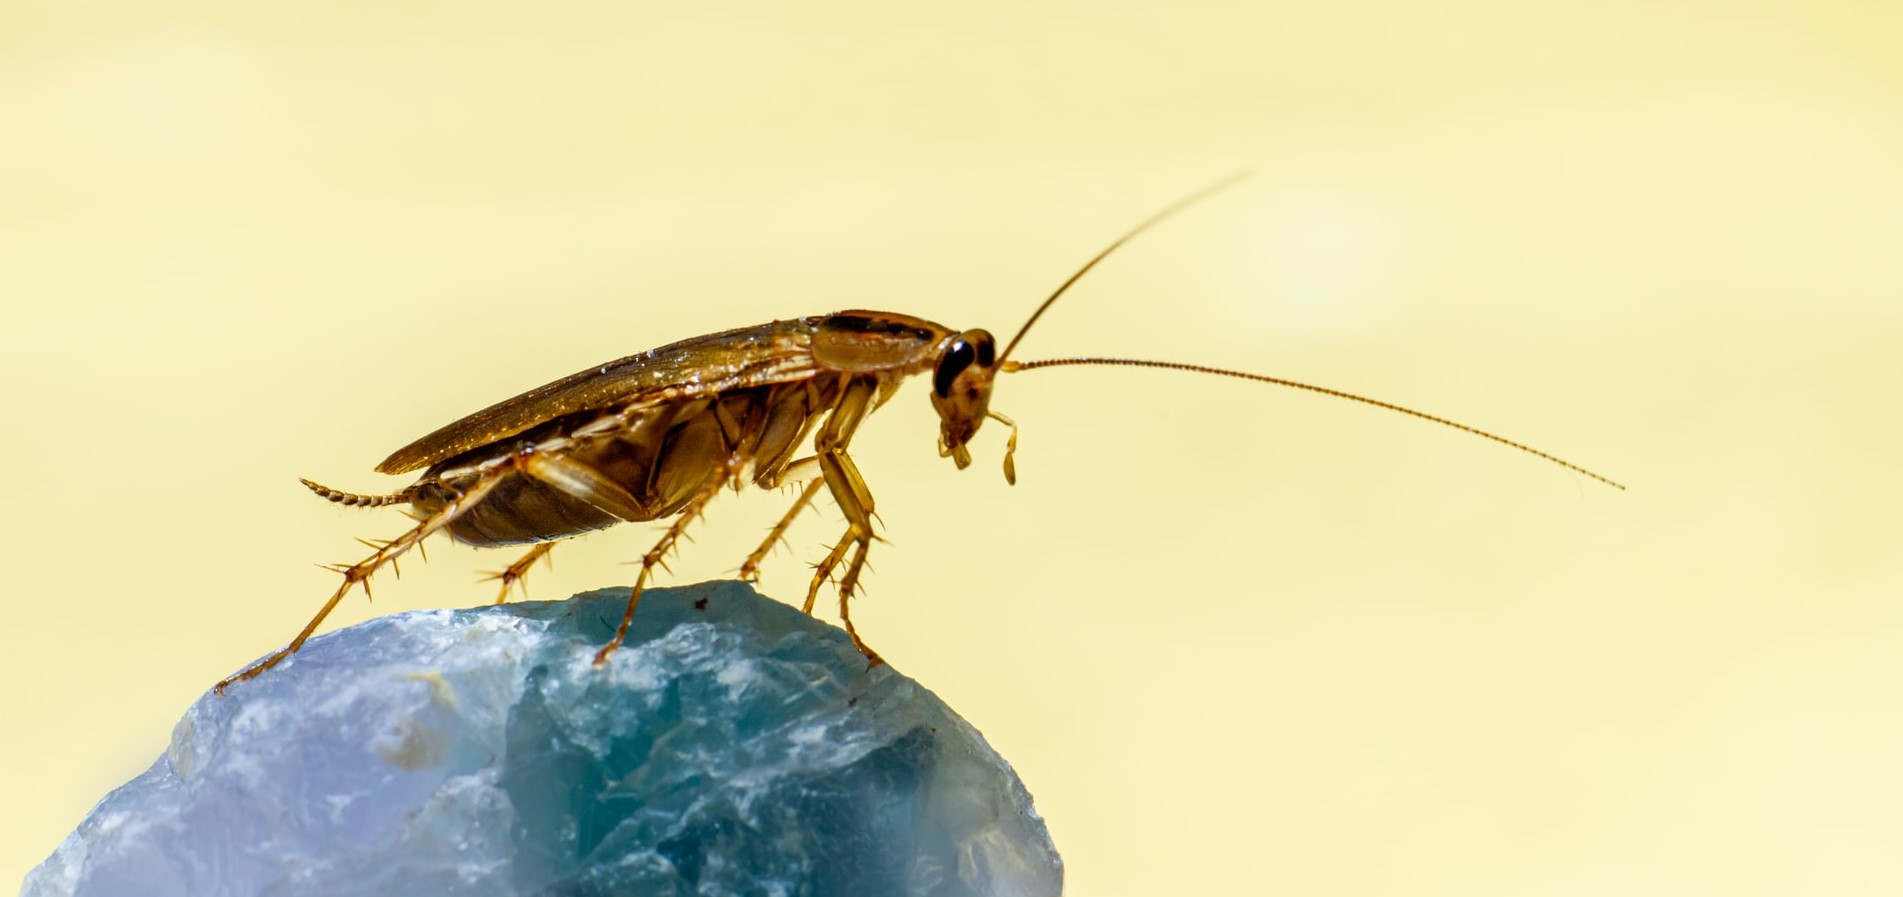 cockroach related to top legal news headlines